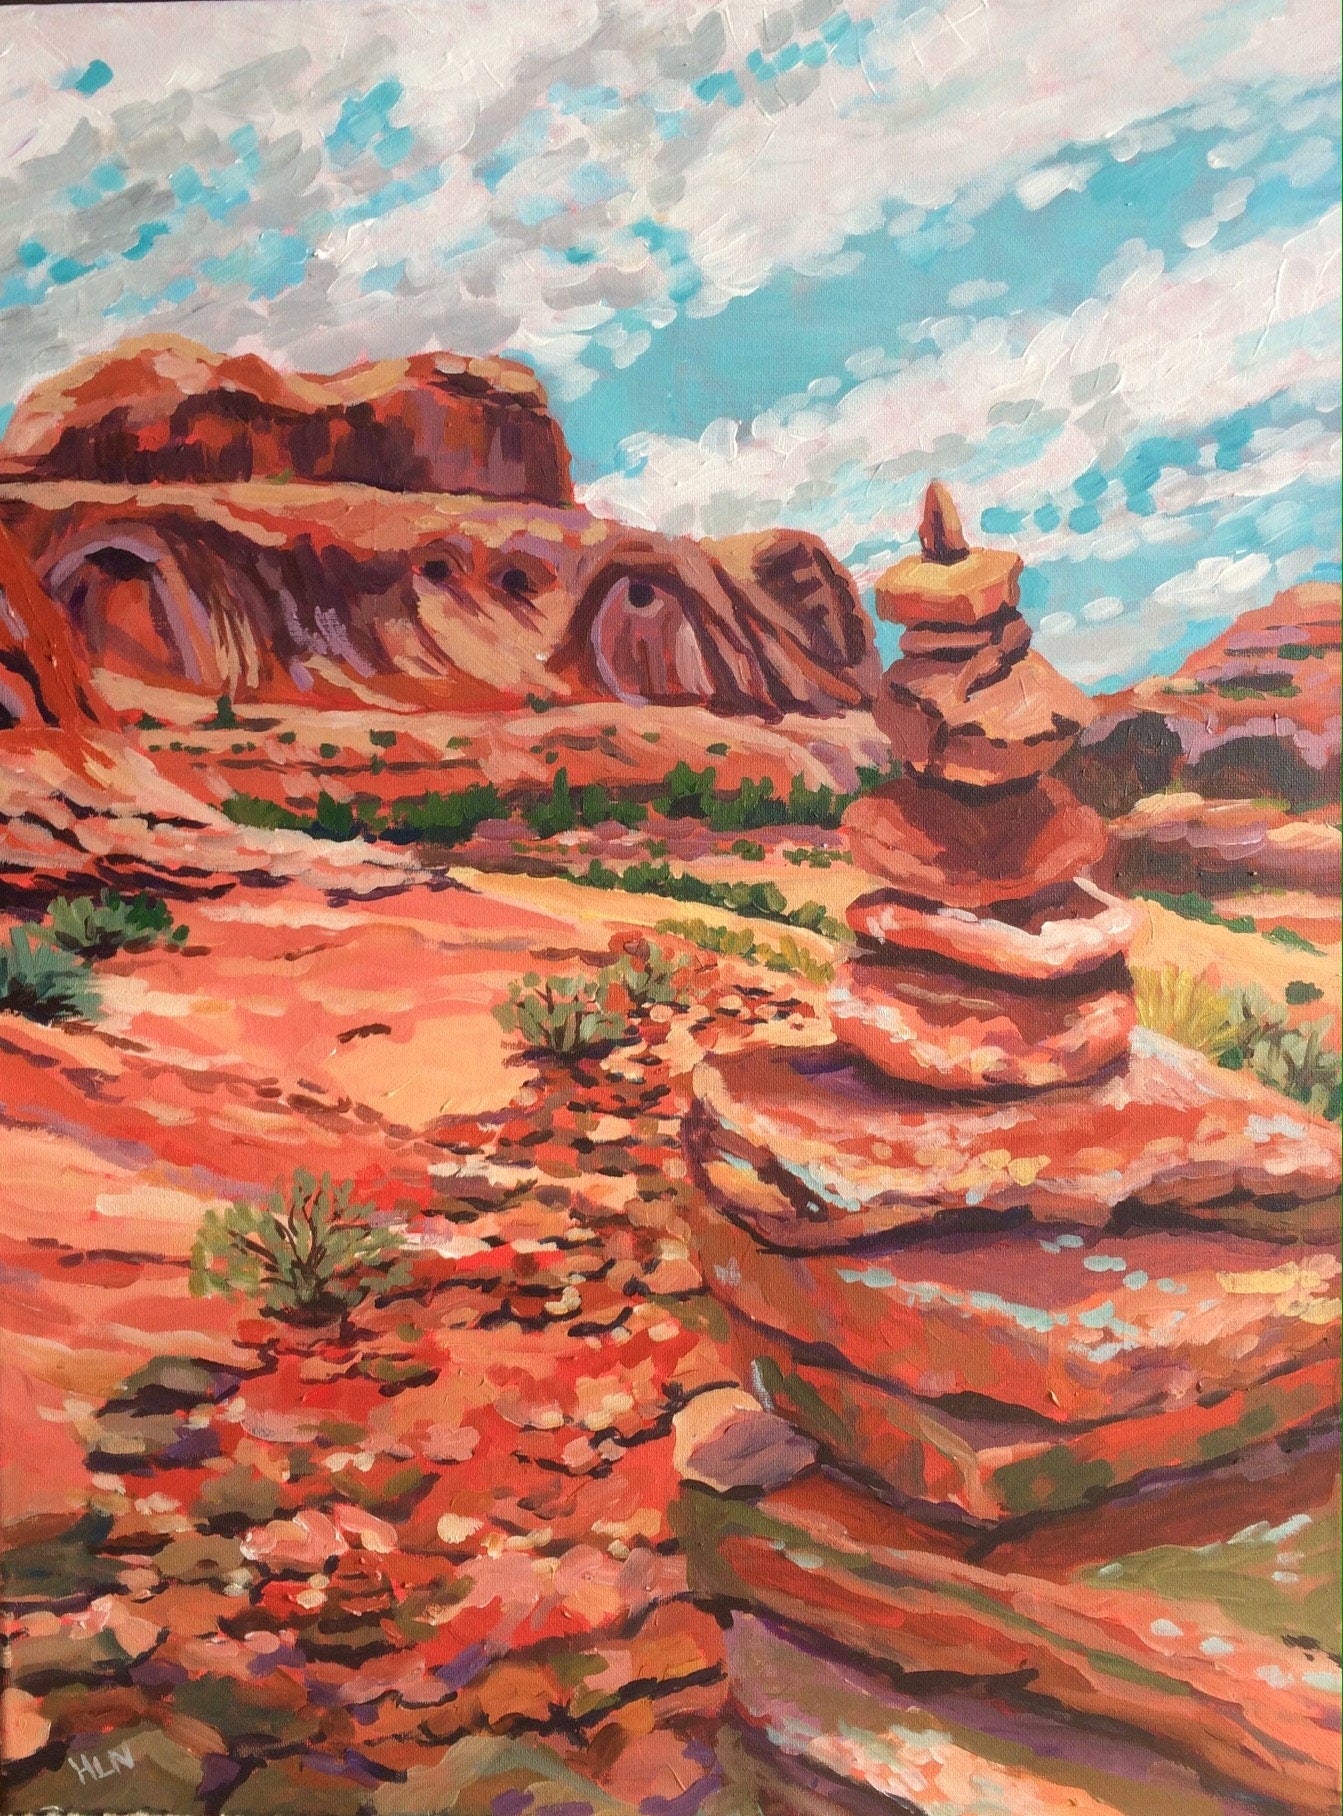 Southwest painting of Moab Utah area near Arches National Park hike leading to Corona Arch marked by rock cairns